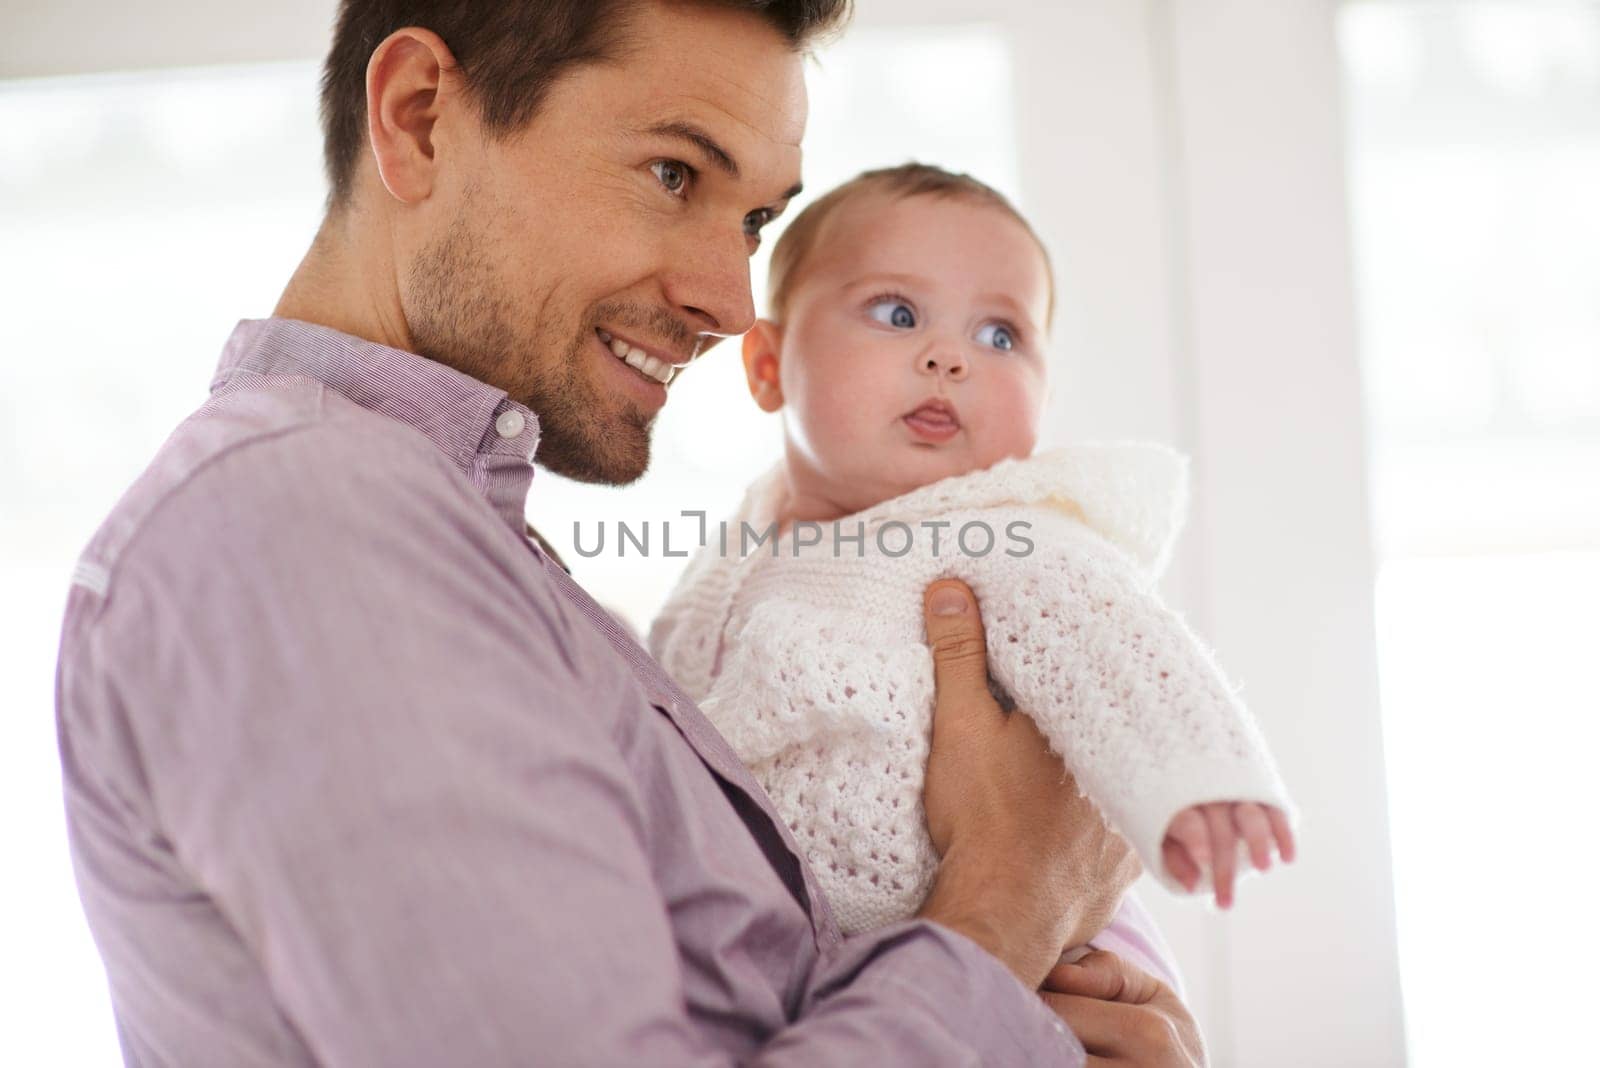 Father, baby and home with love, bonding and fun together with newborn and smile. Happy, family and dad with young child in a living room with parent care in house carrying calm infant with support.